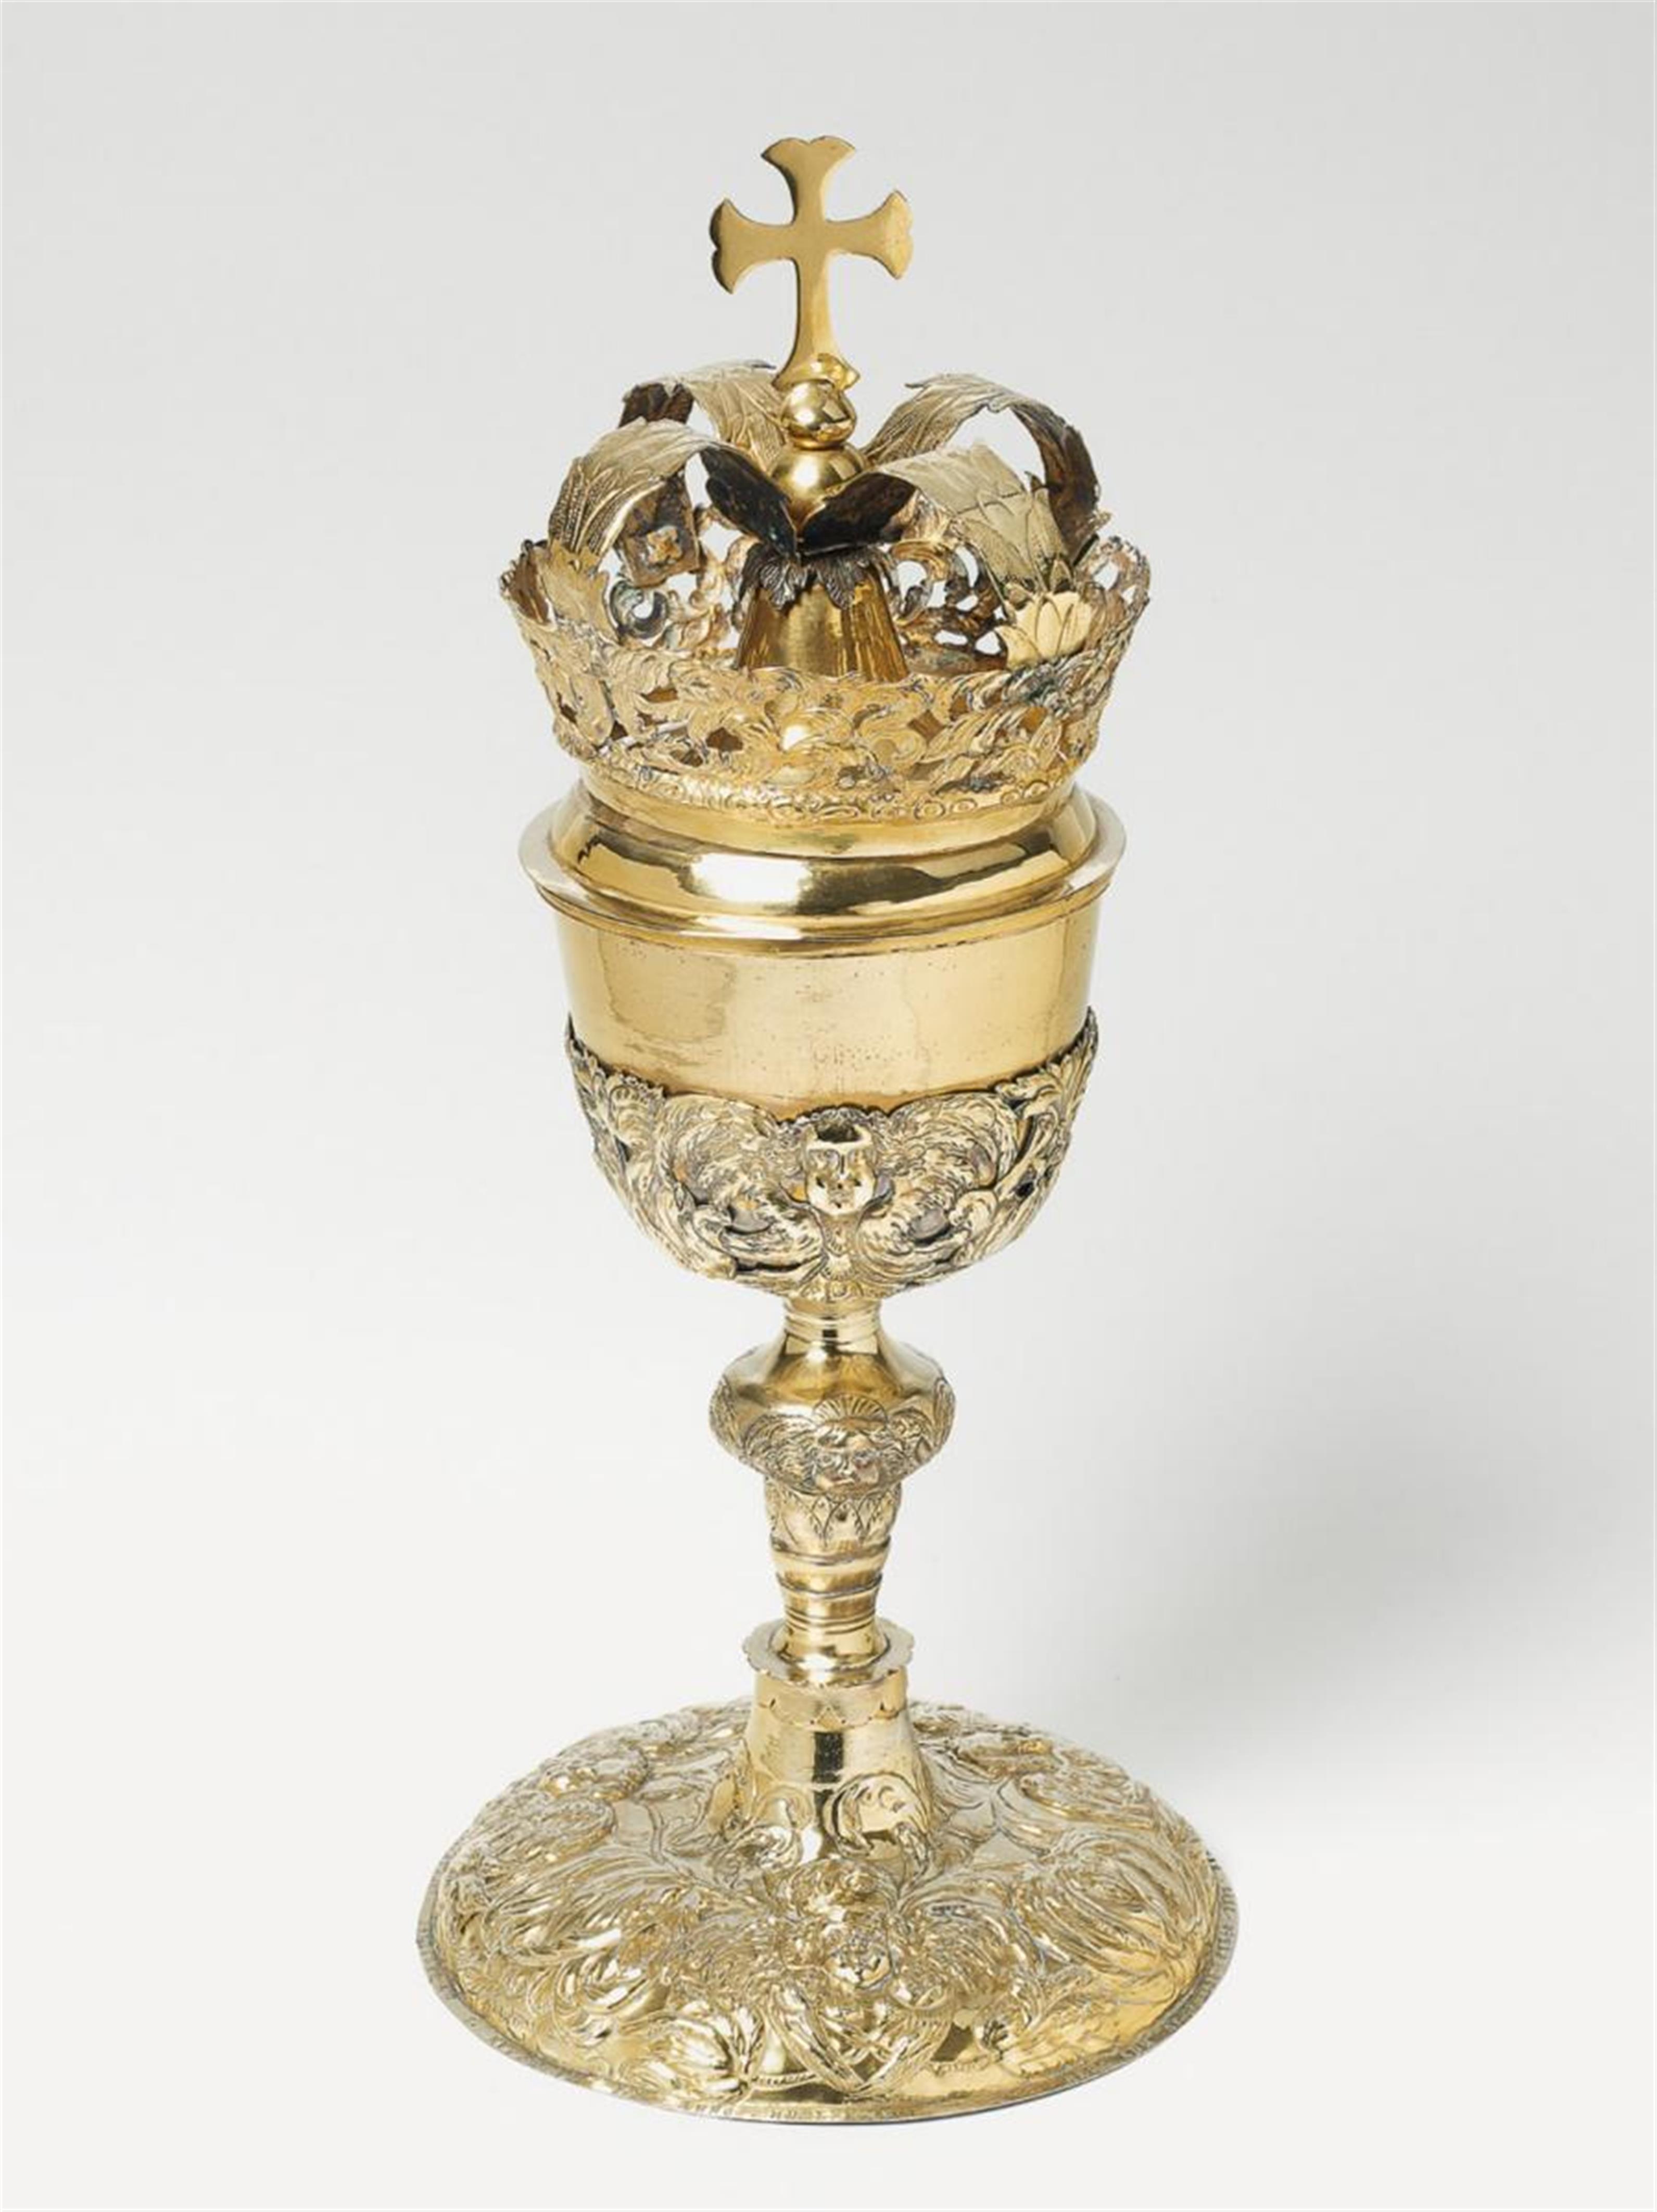 A large silver partially gilt host container. Unmarked, probably Zirknitz / Carniola (present day Slovenia), ca. 1685. Großes Ziborium - image-1